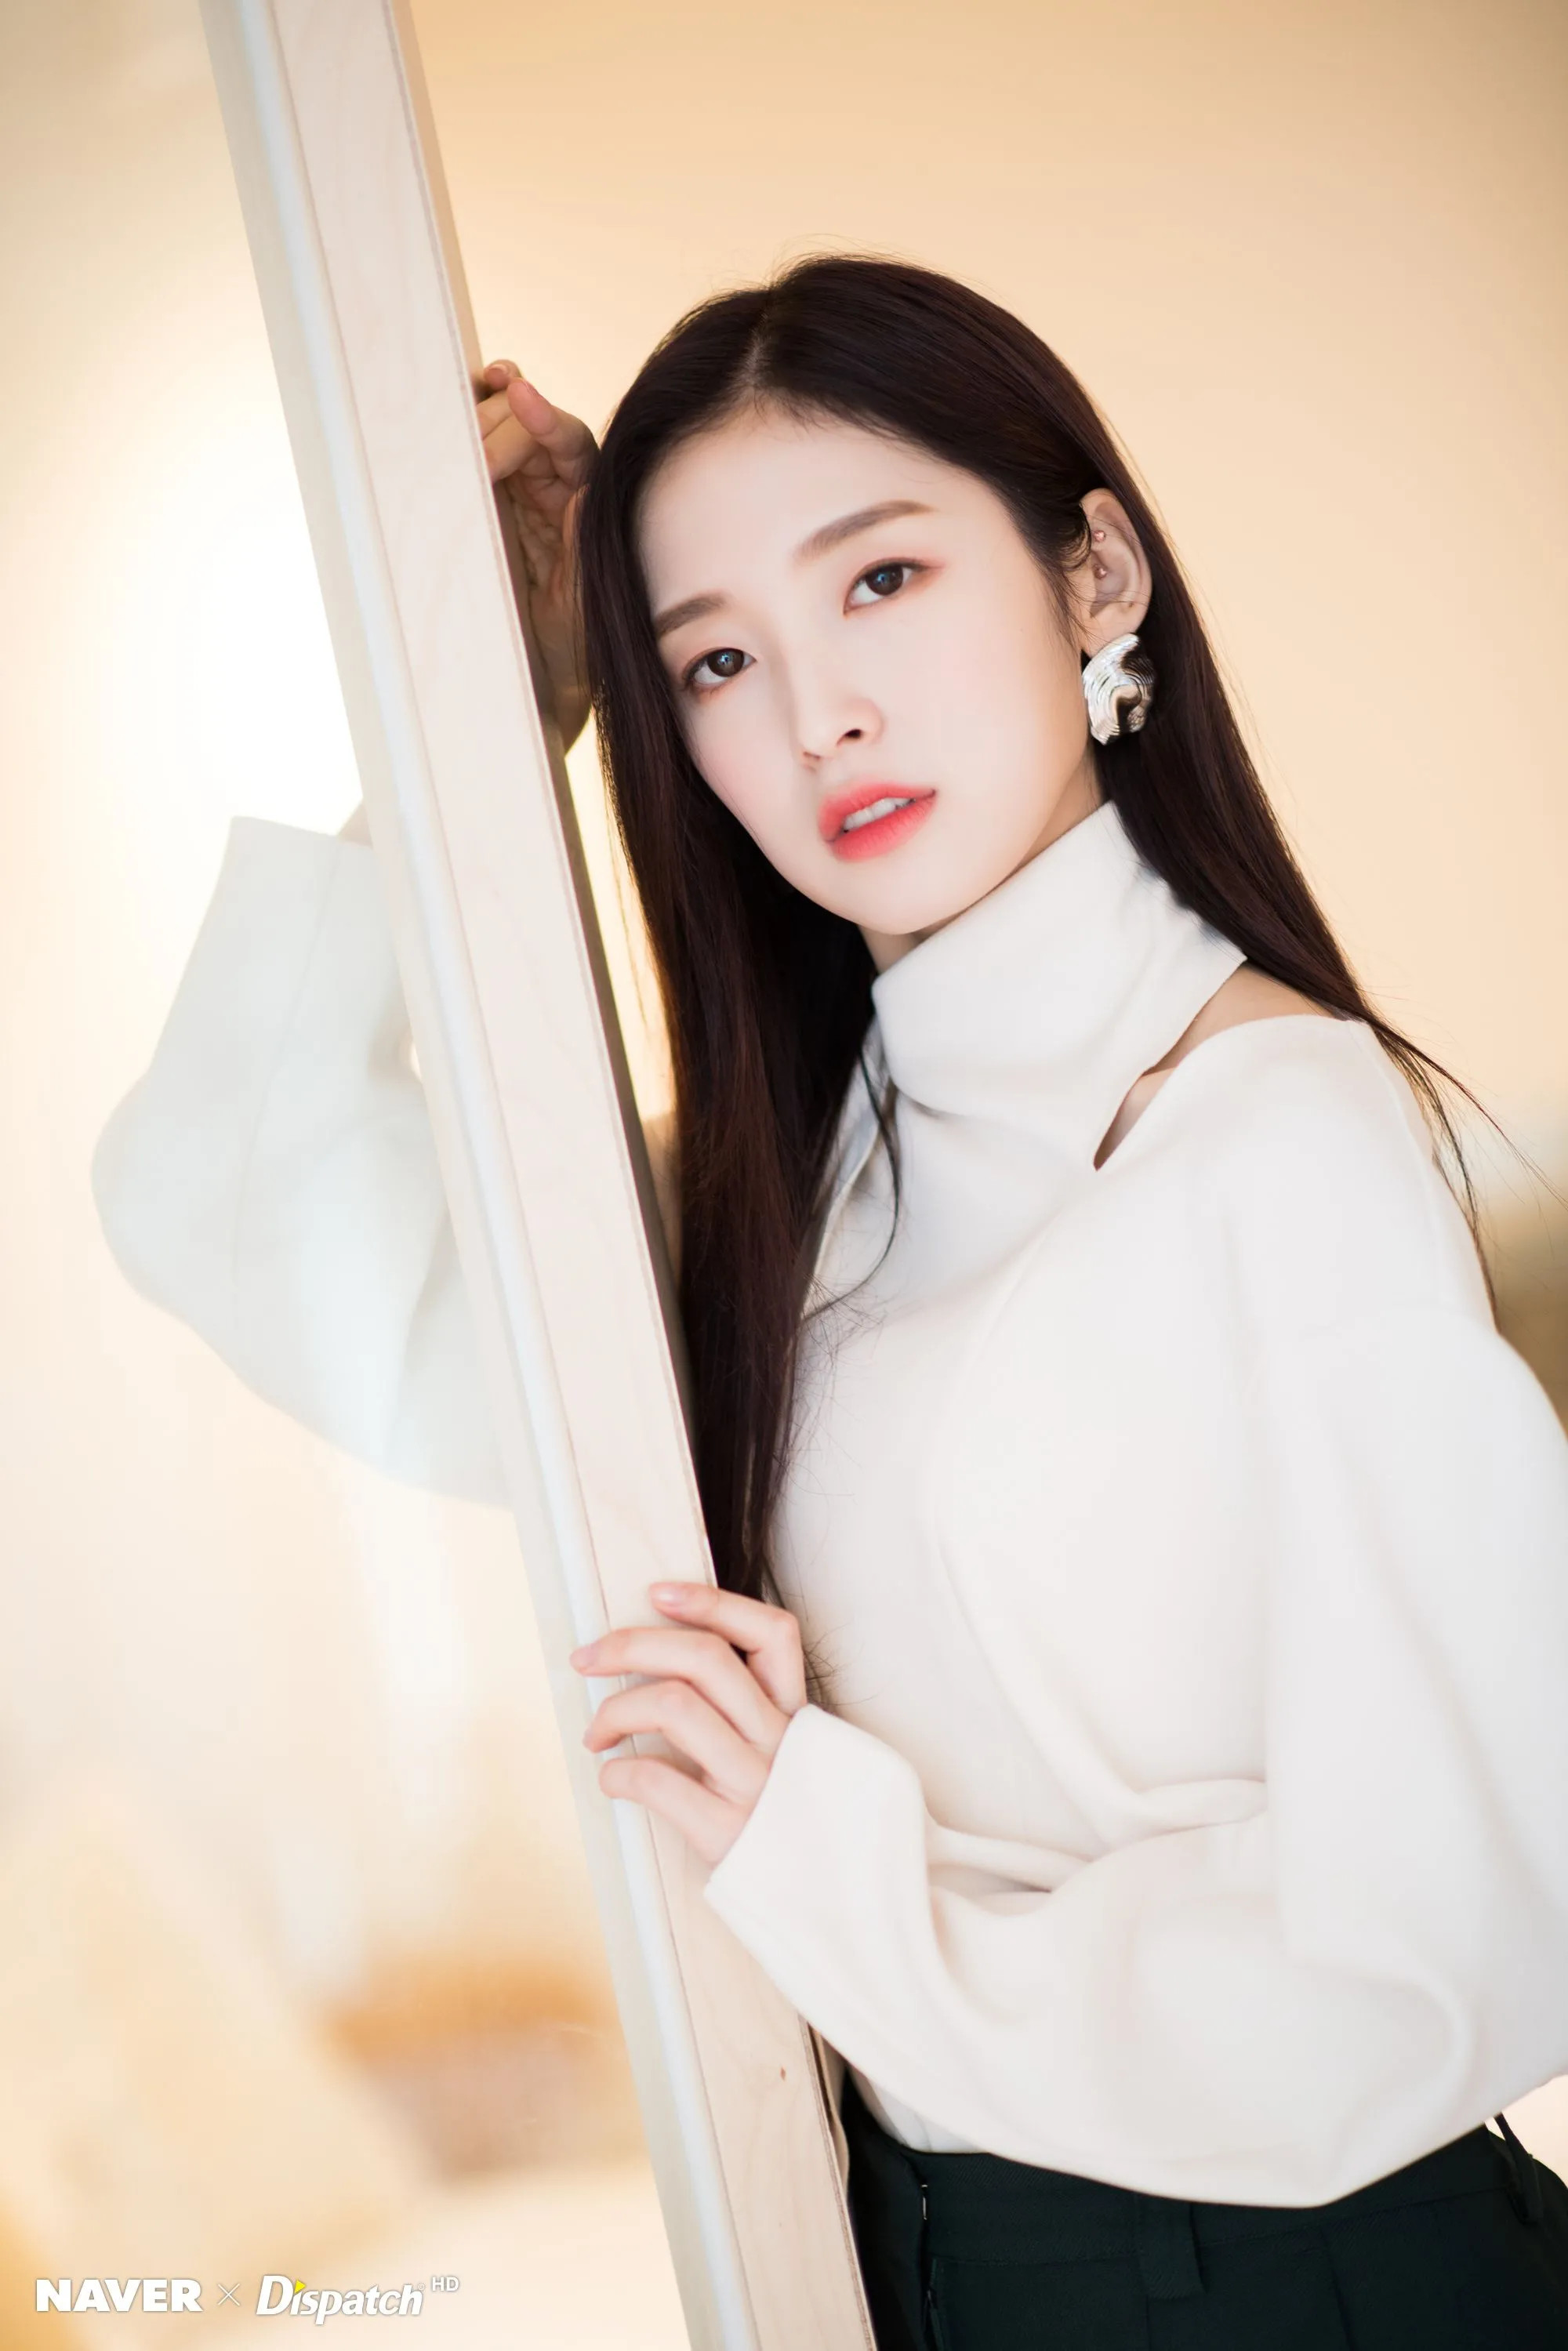 191105 Oh My Girl's Arin photoshoot by Naver x Dispatch | kpopping